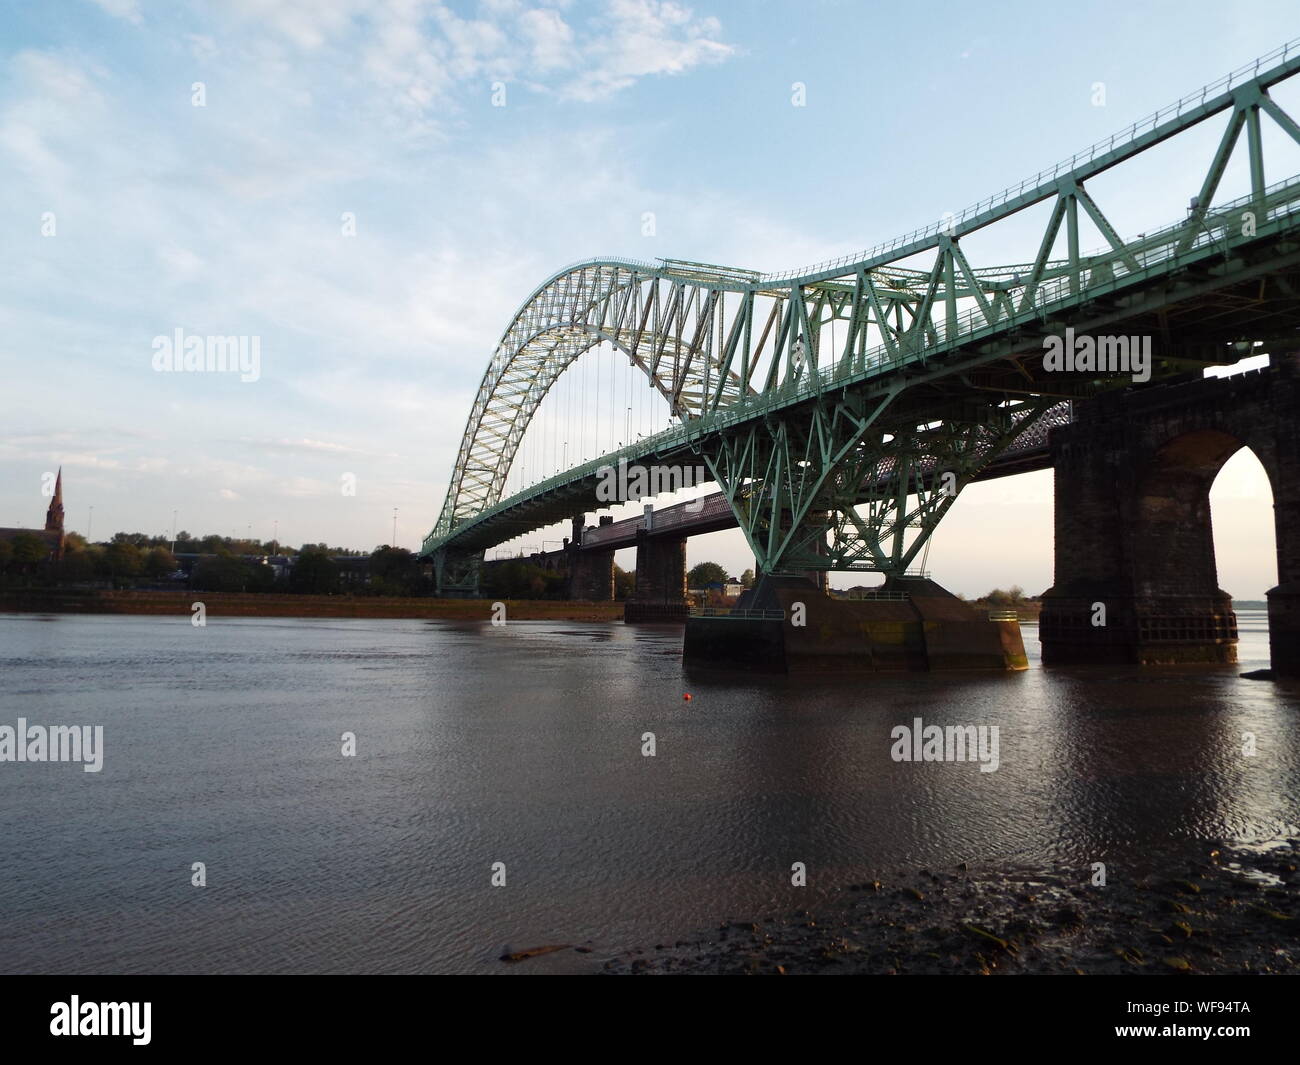 Low Angle View Of Silver Jubilee Bridge Over River Against Sky On Sunny Day Stock Photo